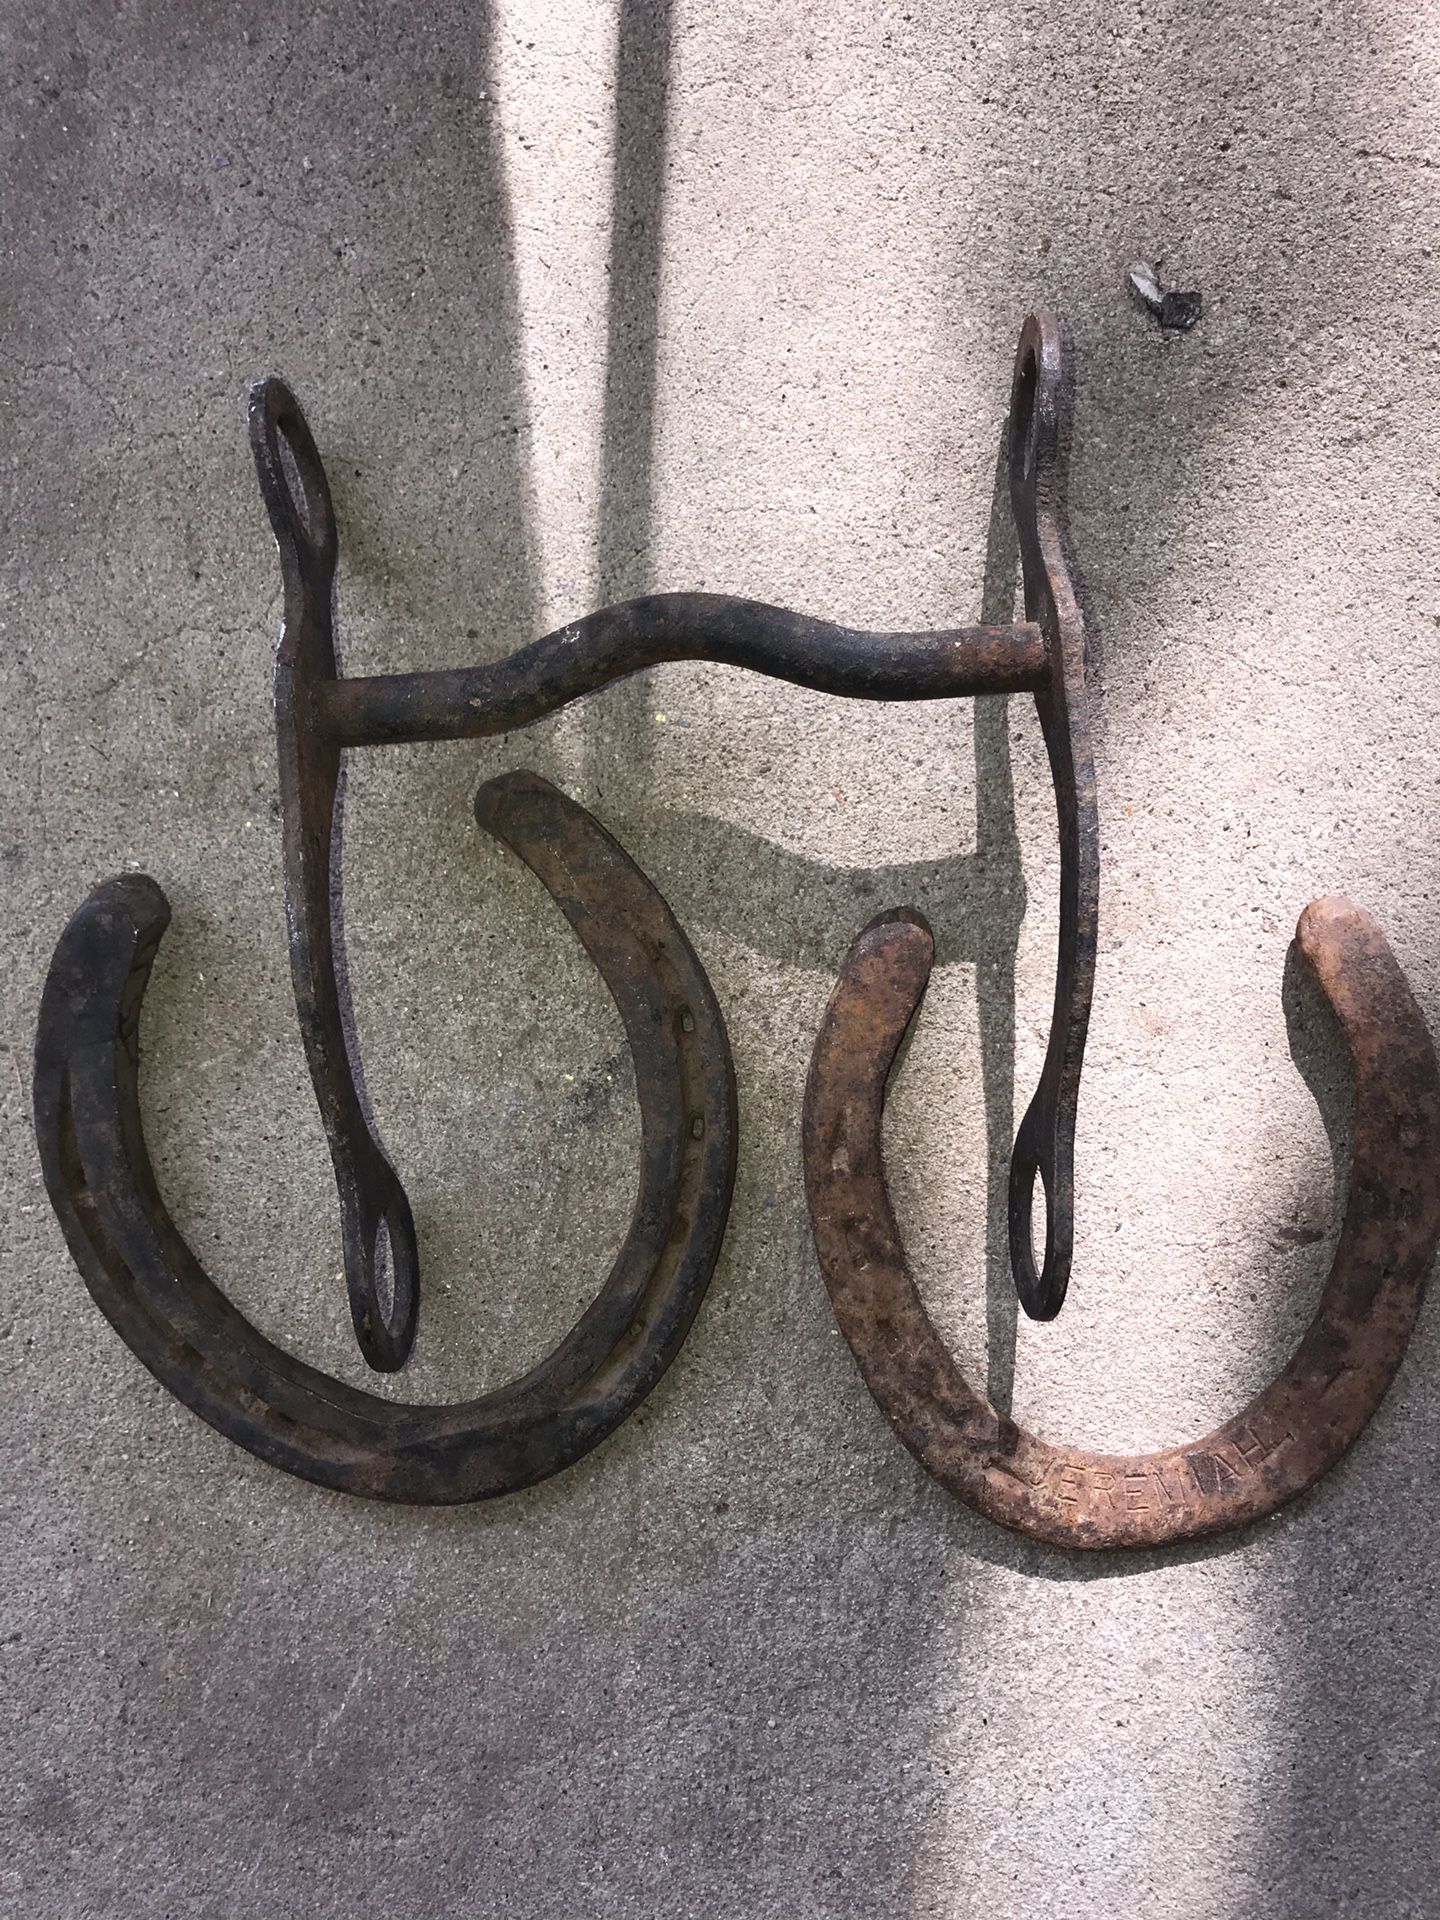 Western bit and two horseshoes